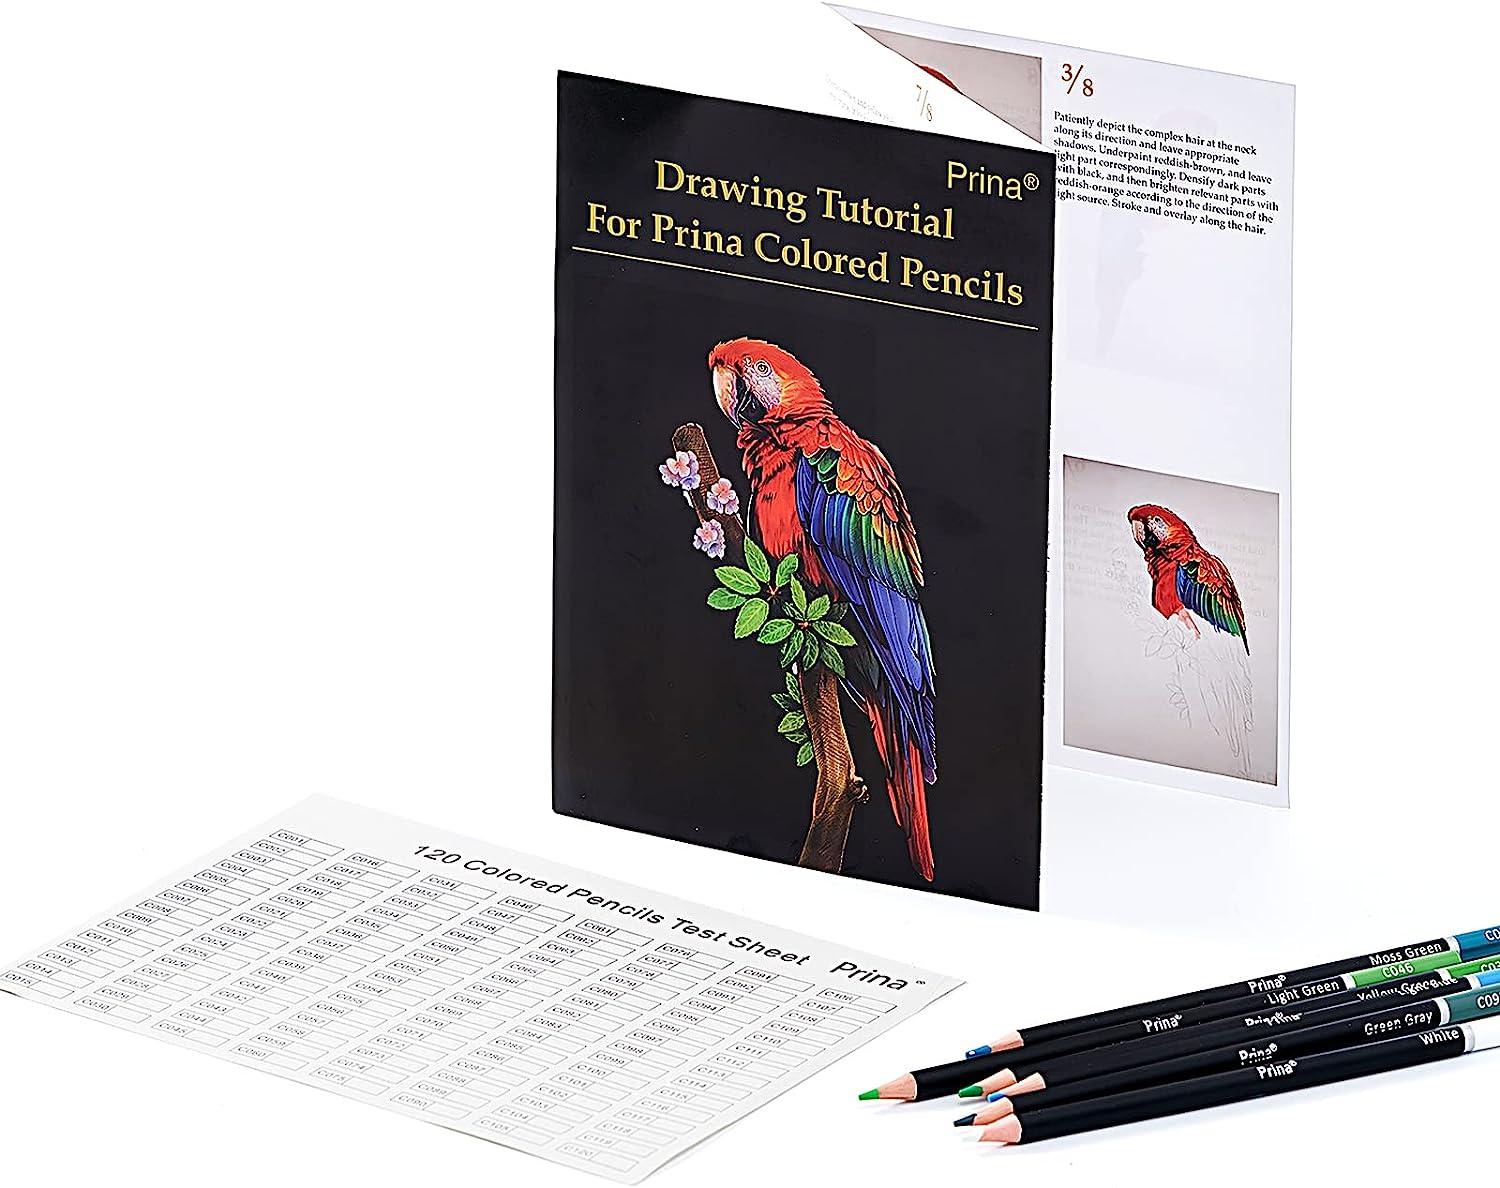 120-color Oil-based Colored Pencils Set For Art Drawing